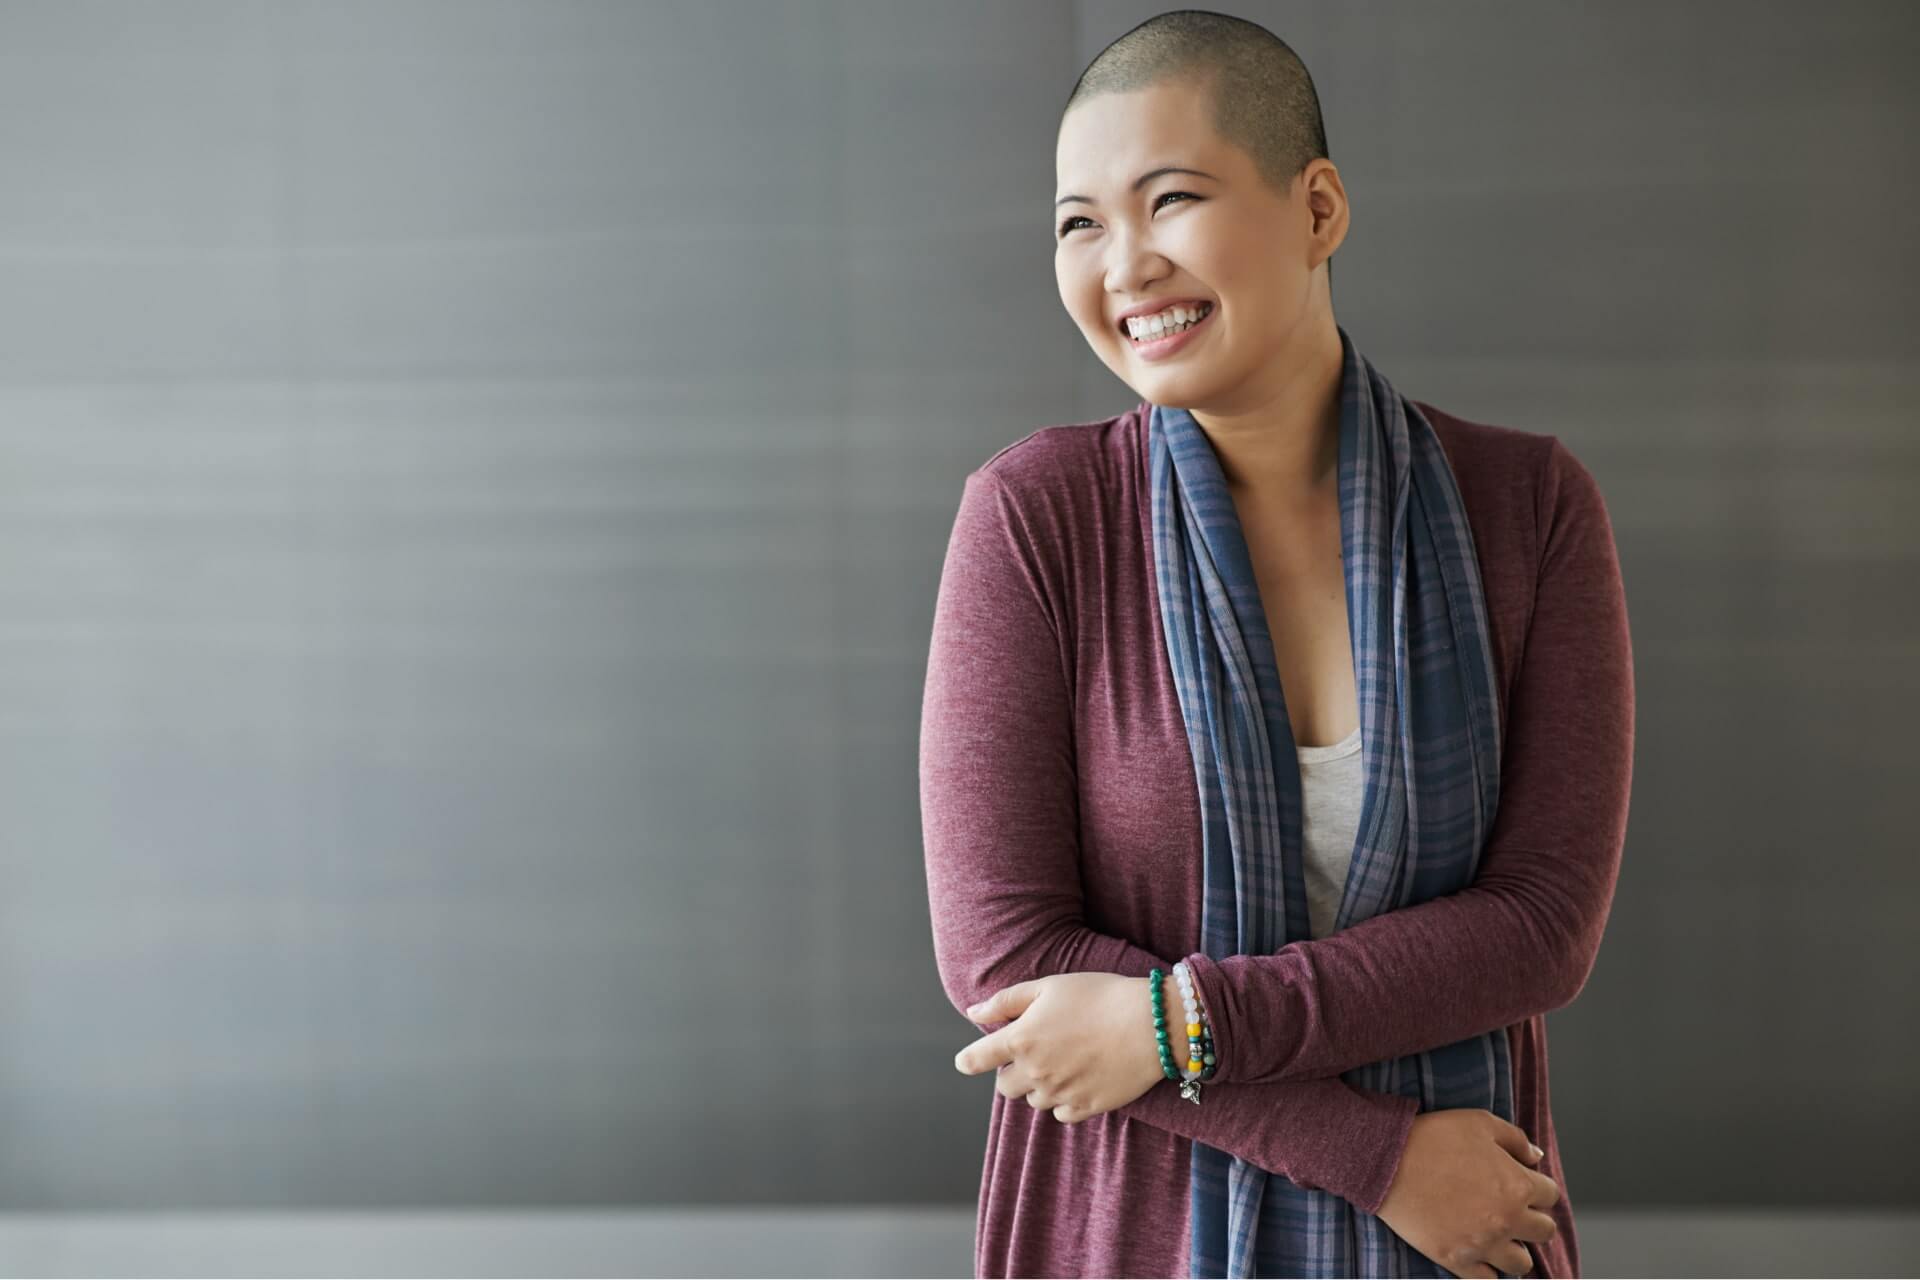 Hair Growth After Chemo: Tips from a Cancer Survivor